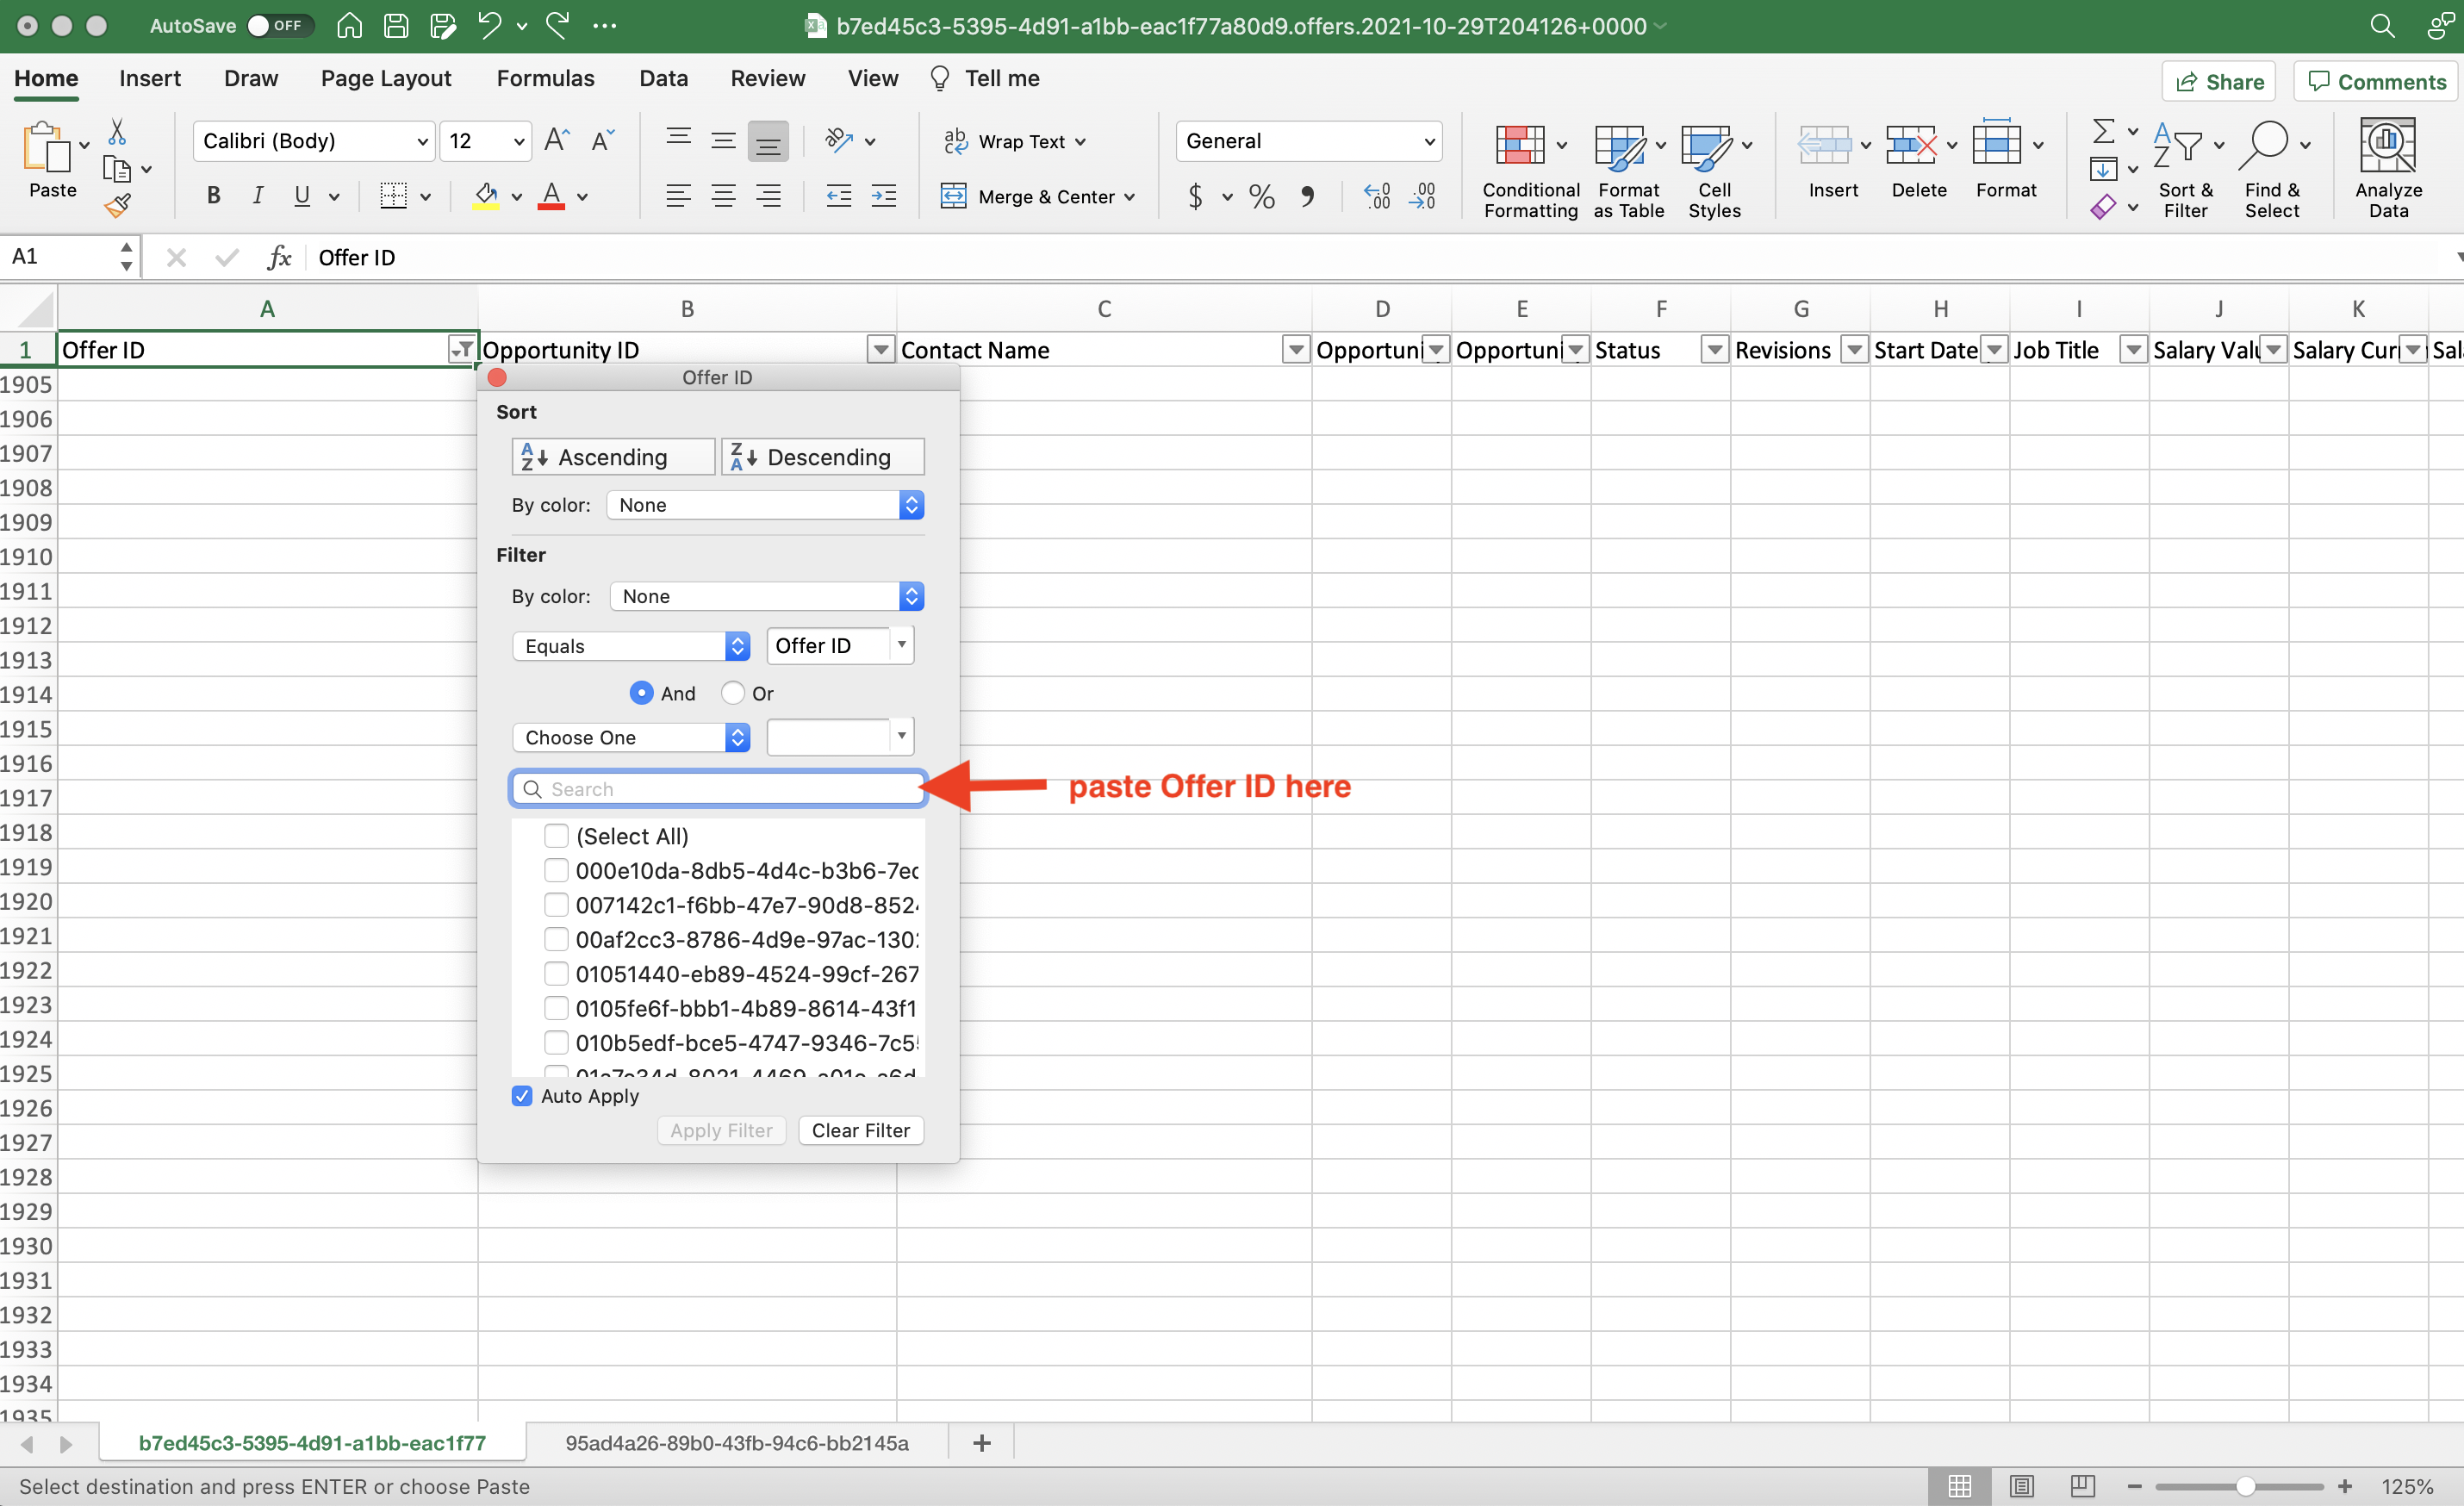 Filter menu expanded from cell A1 in Offers spreadsheet; arrow points to search field with instructions to paste Offer ID here.